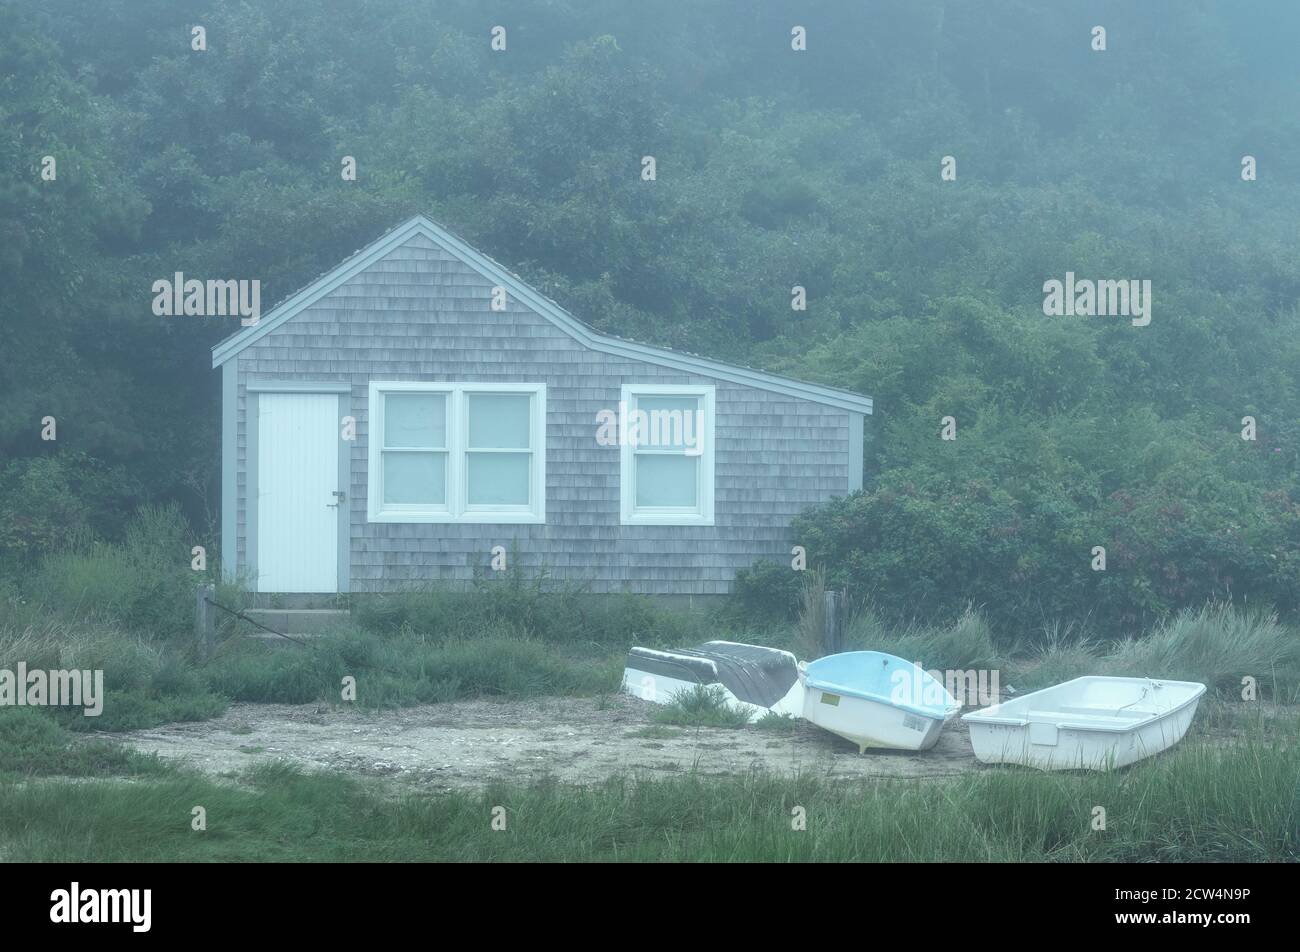 Charming fishing shack cottage in morning mist. Stock Photo